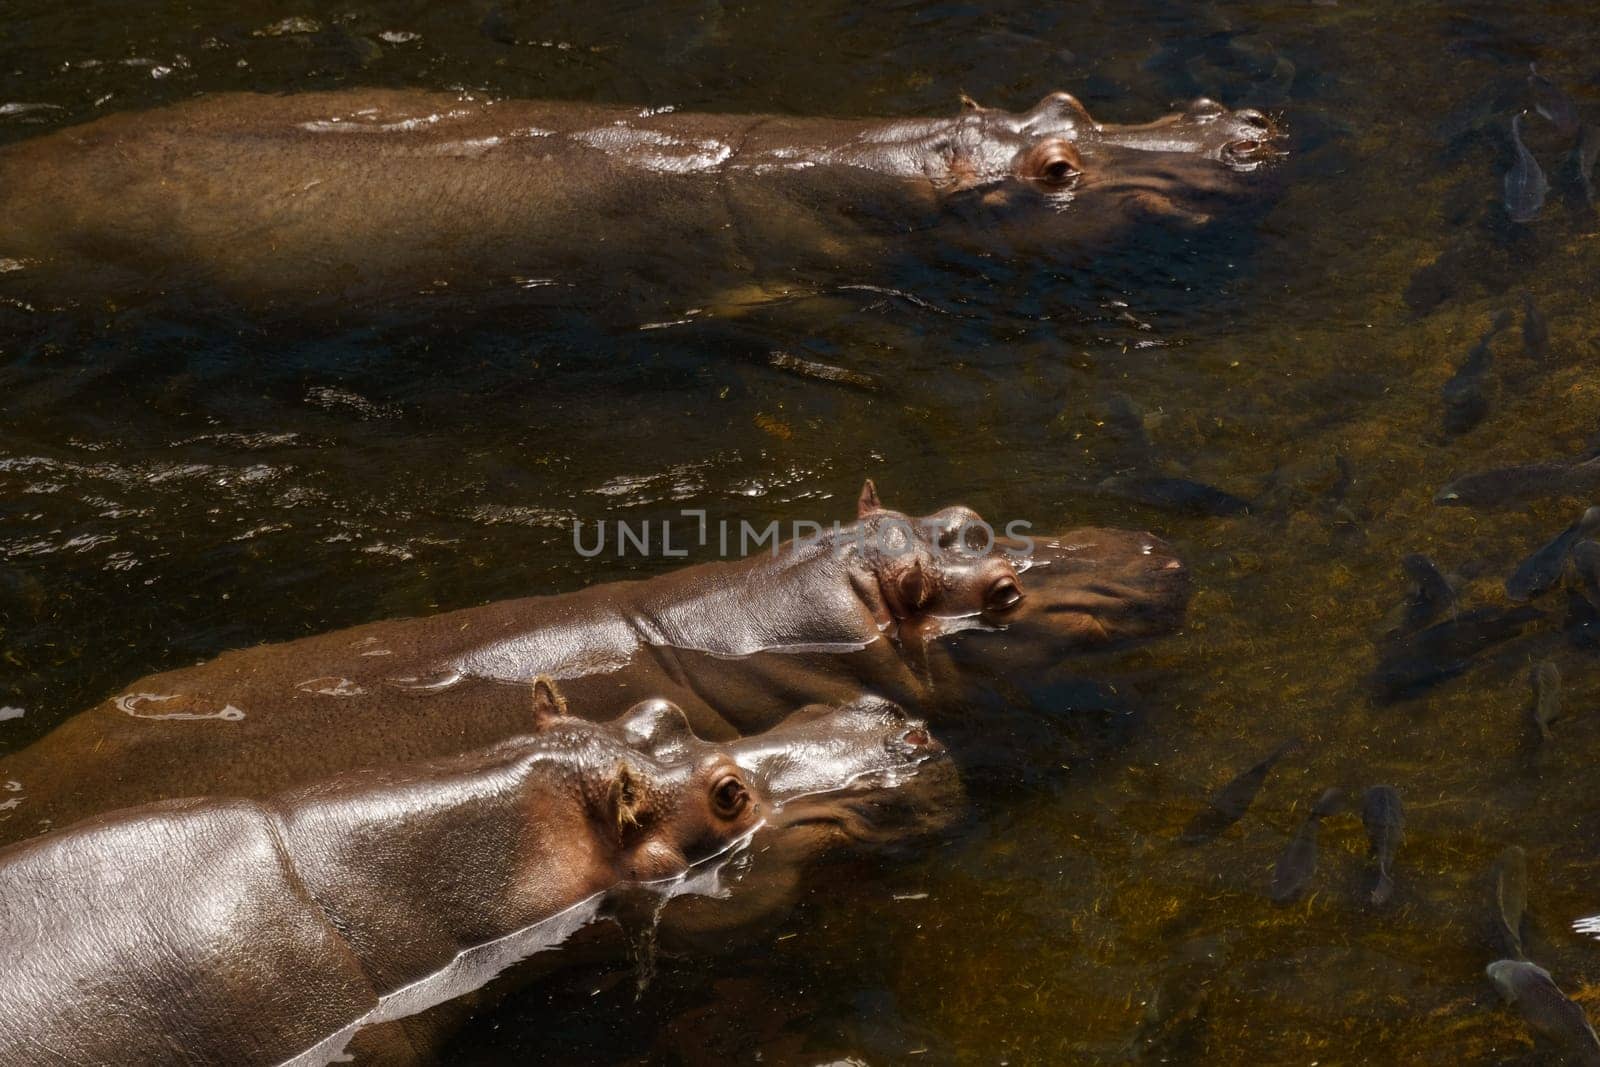 Three hippopotamuses, large aquatic mammals, swim in a body of water, their bodies partially submerged, only their heads visible.